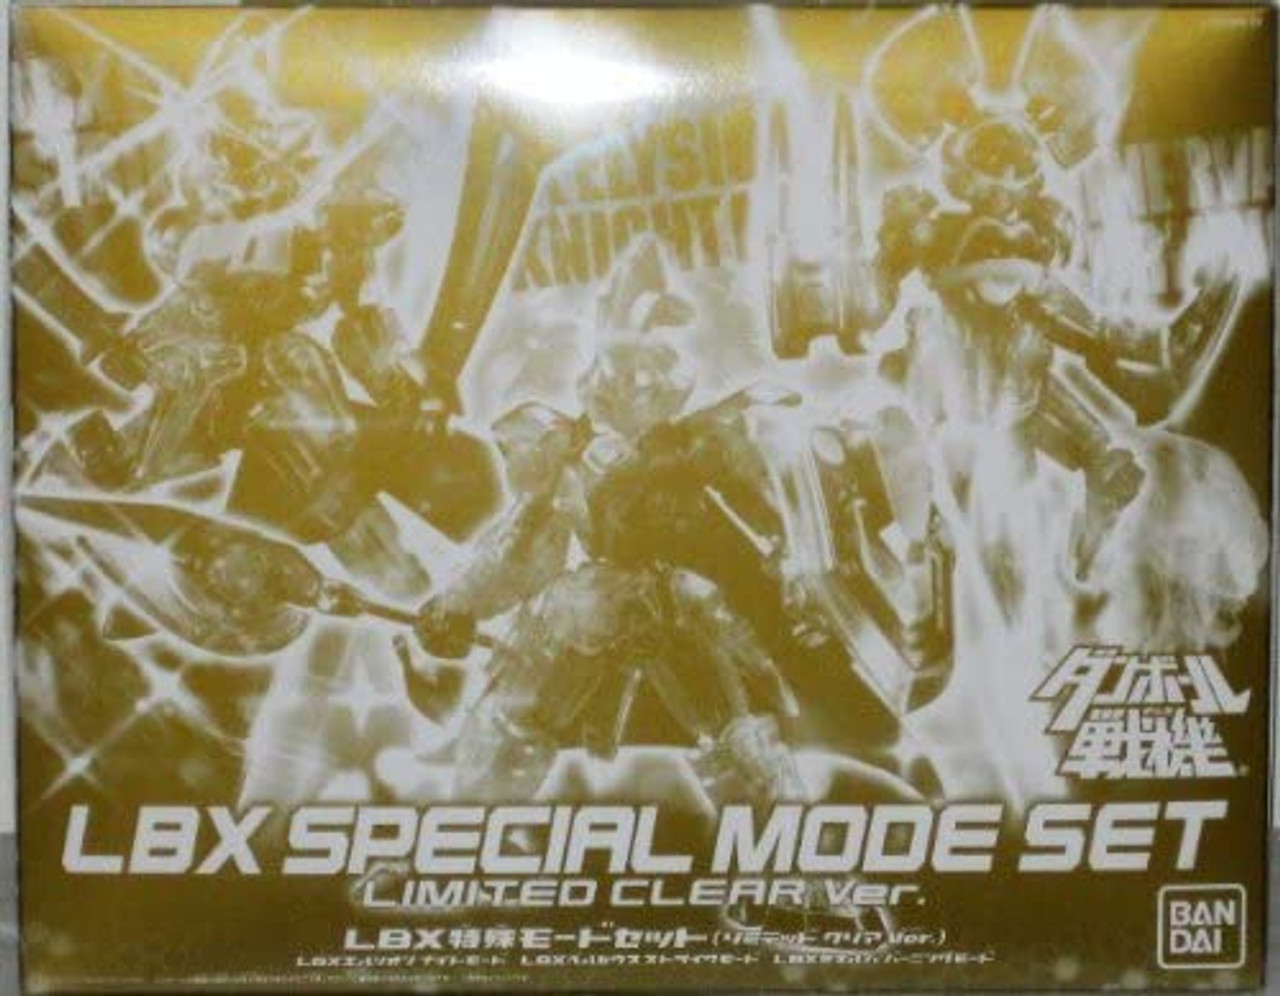 BANDAI The Little Battlers LBX Special Mode Set (Limited Clear Ver.)